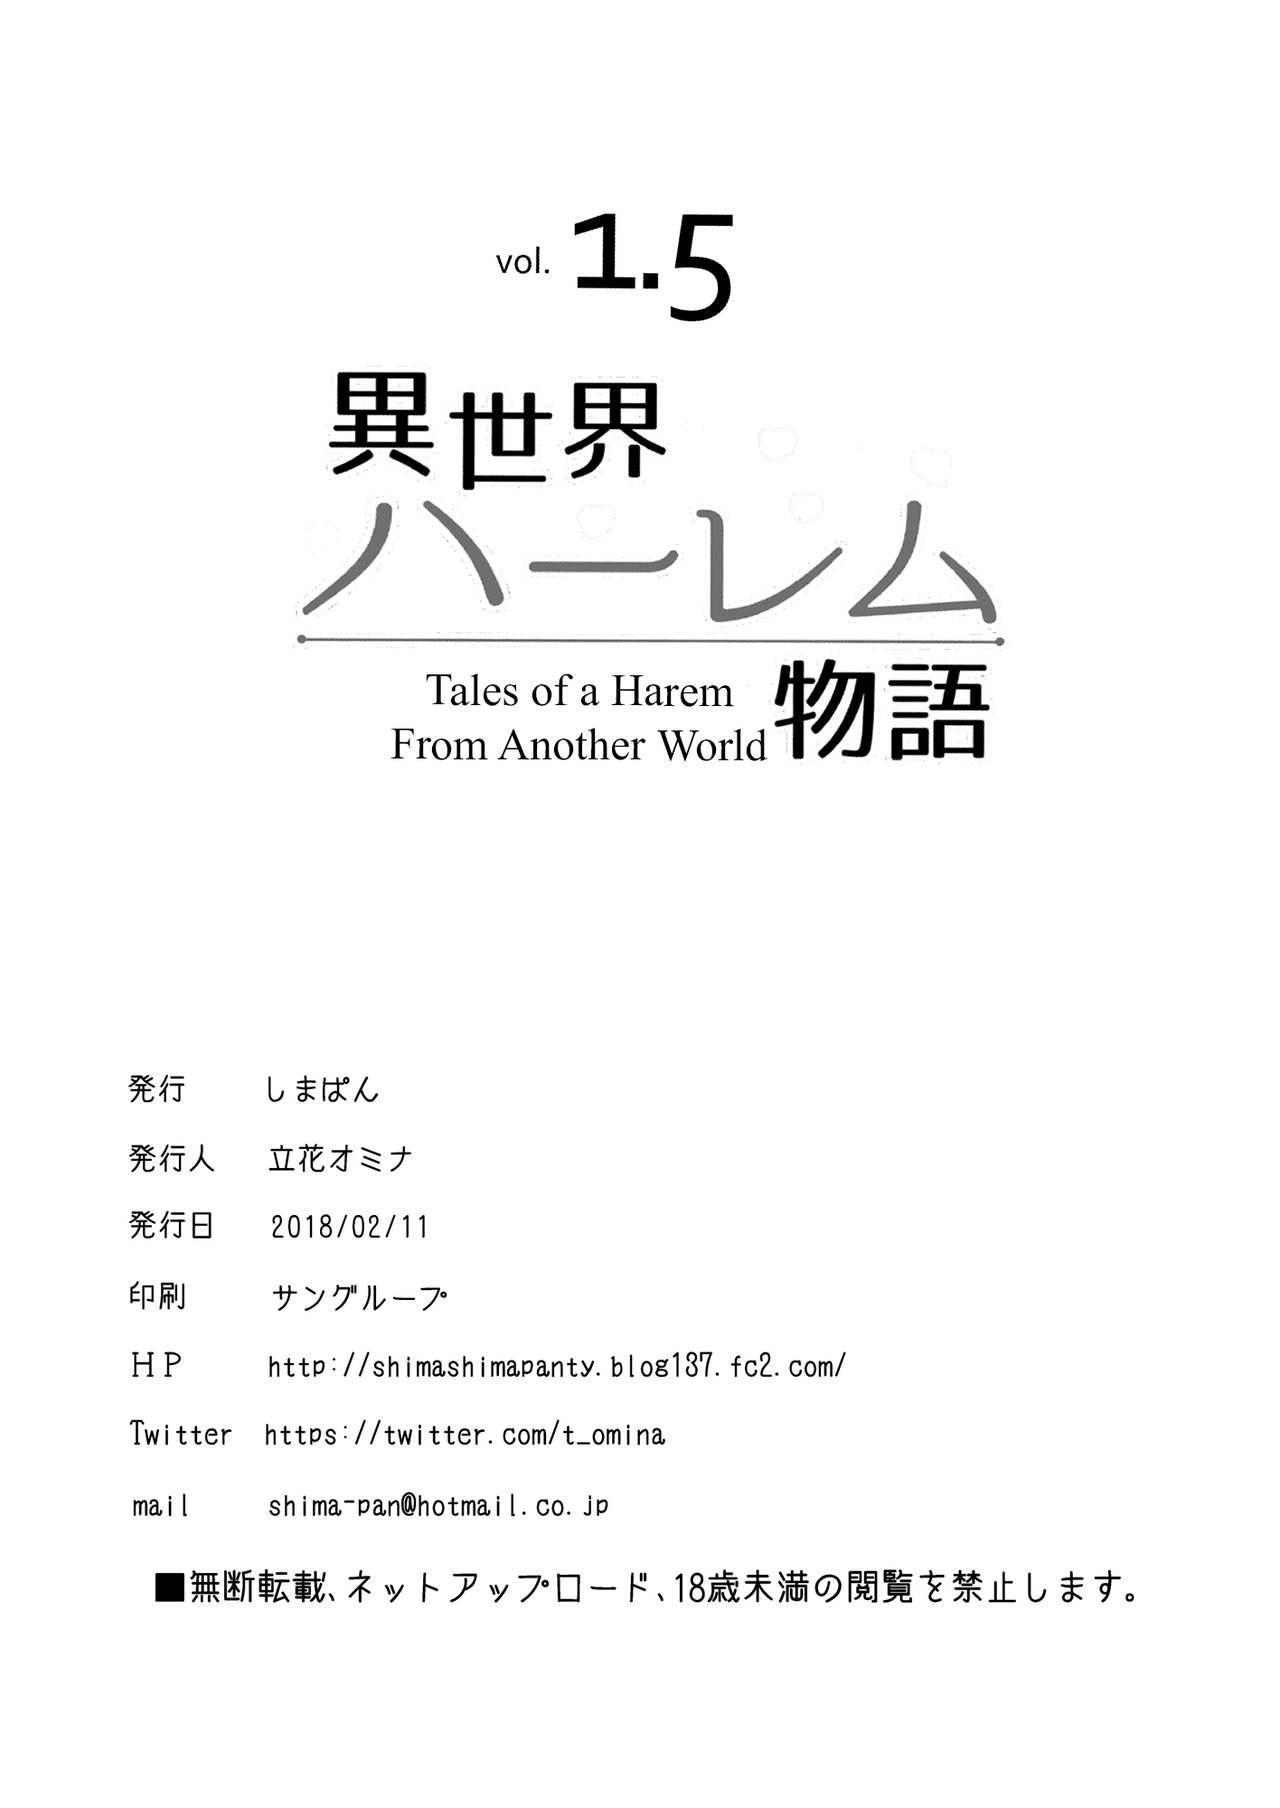 Highschool Isekai Harem Monogatari - Tales of Harem Vol. 1.5｜Tales of a Harem from Another World Vol. 1.5 - Original Pussy To Mouth - Page 8